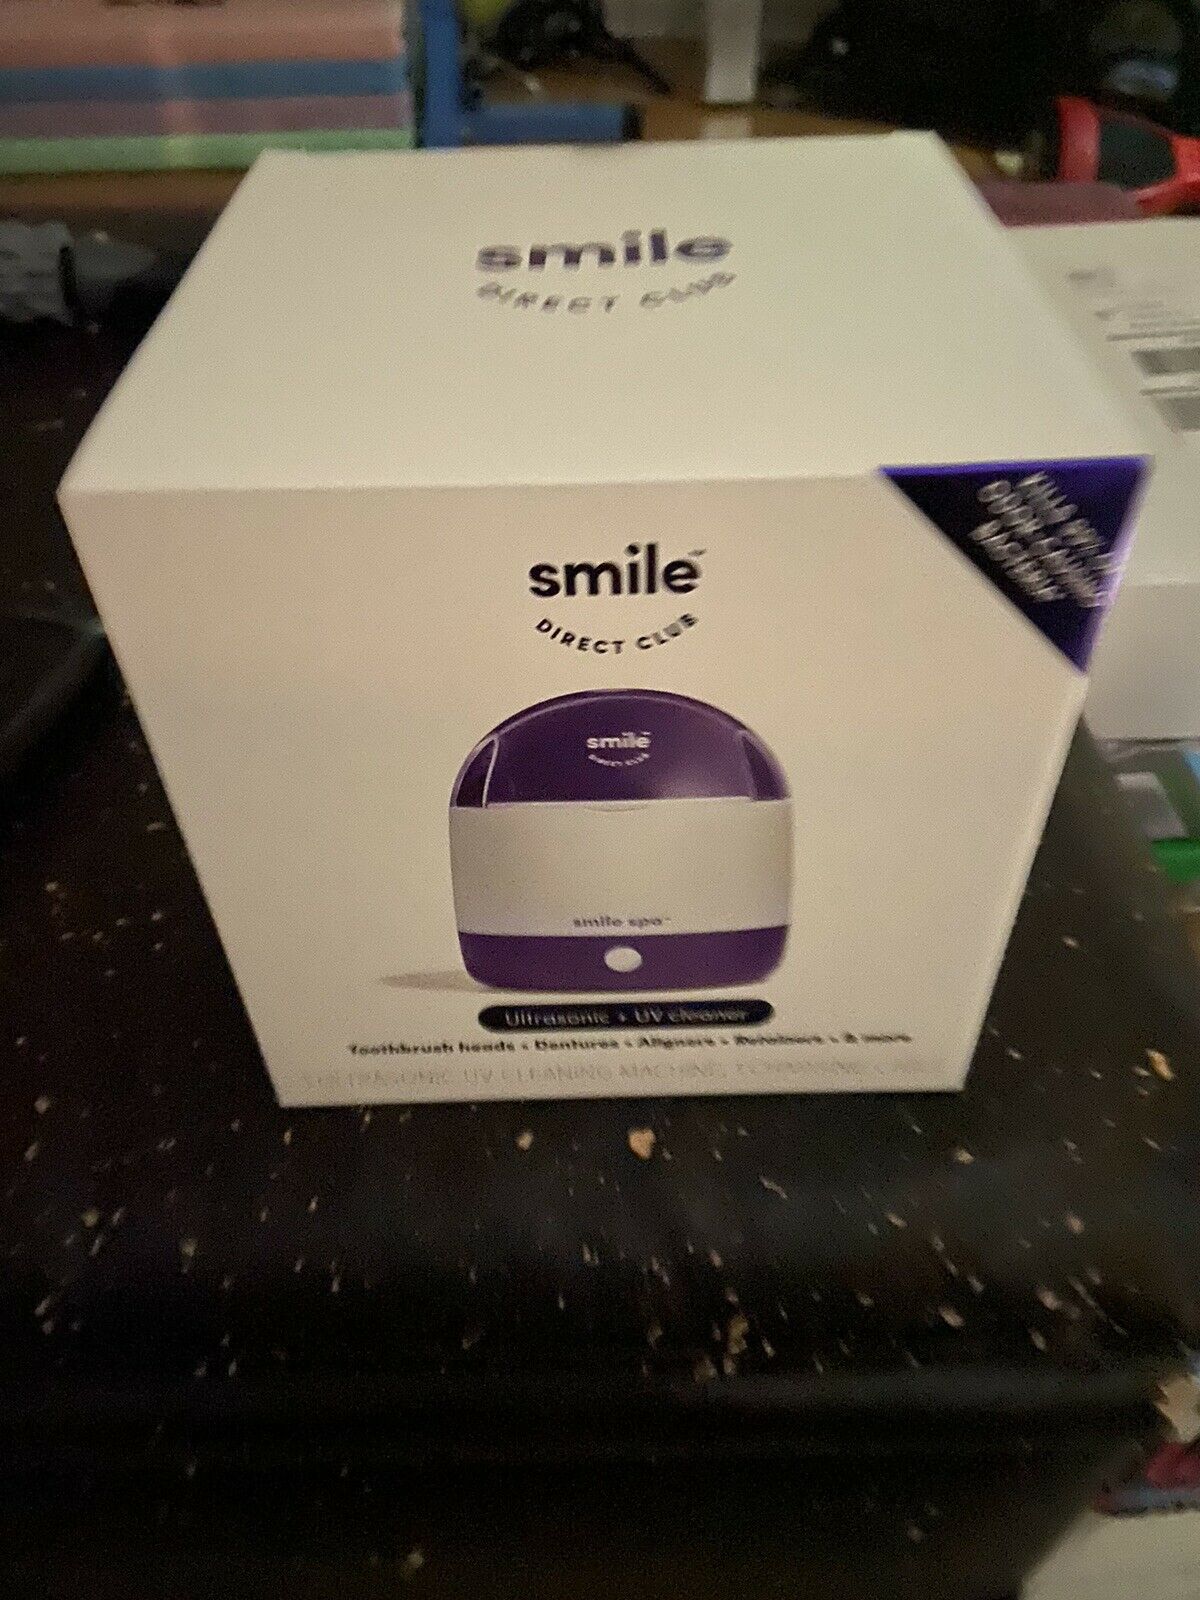 Smile Direct Club Ultrasonic + Uv Cleaner Brand New Sealed In Box